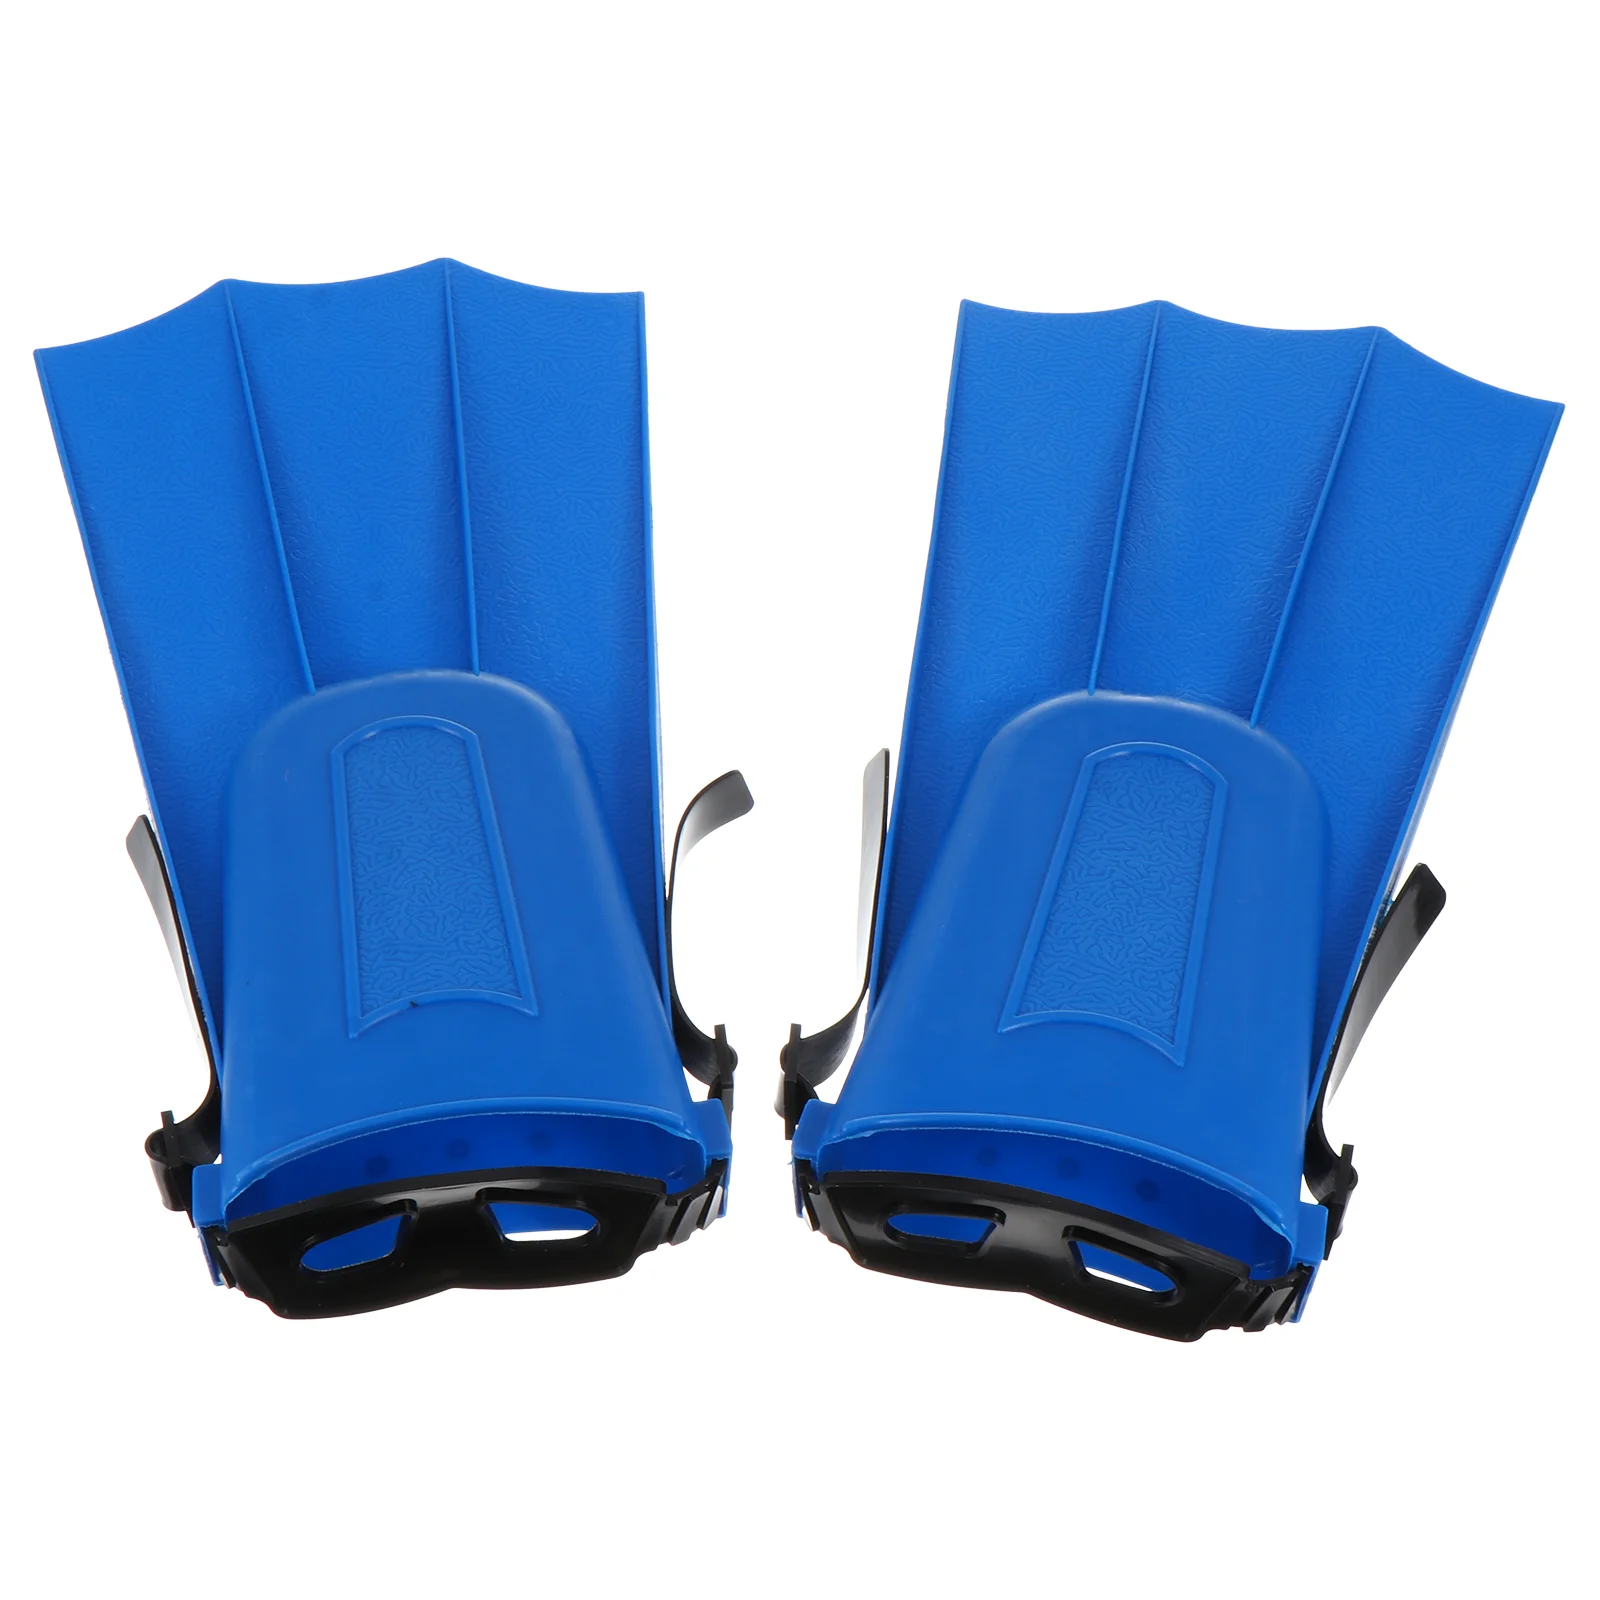 Rubber Travel Fins Snorkeling Gear Adults Swim Flippers Silicone Floating Swimming Diving Comfortable